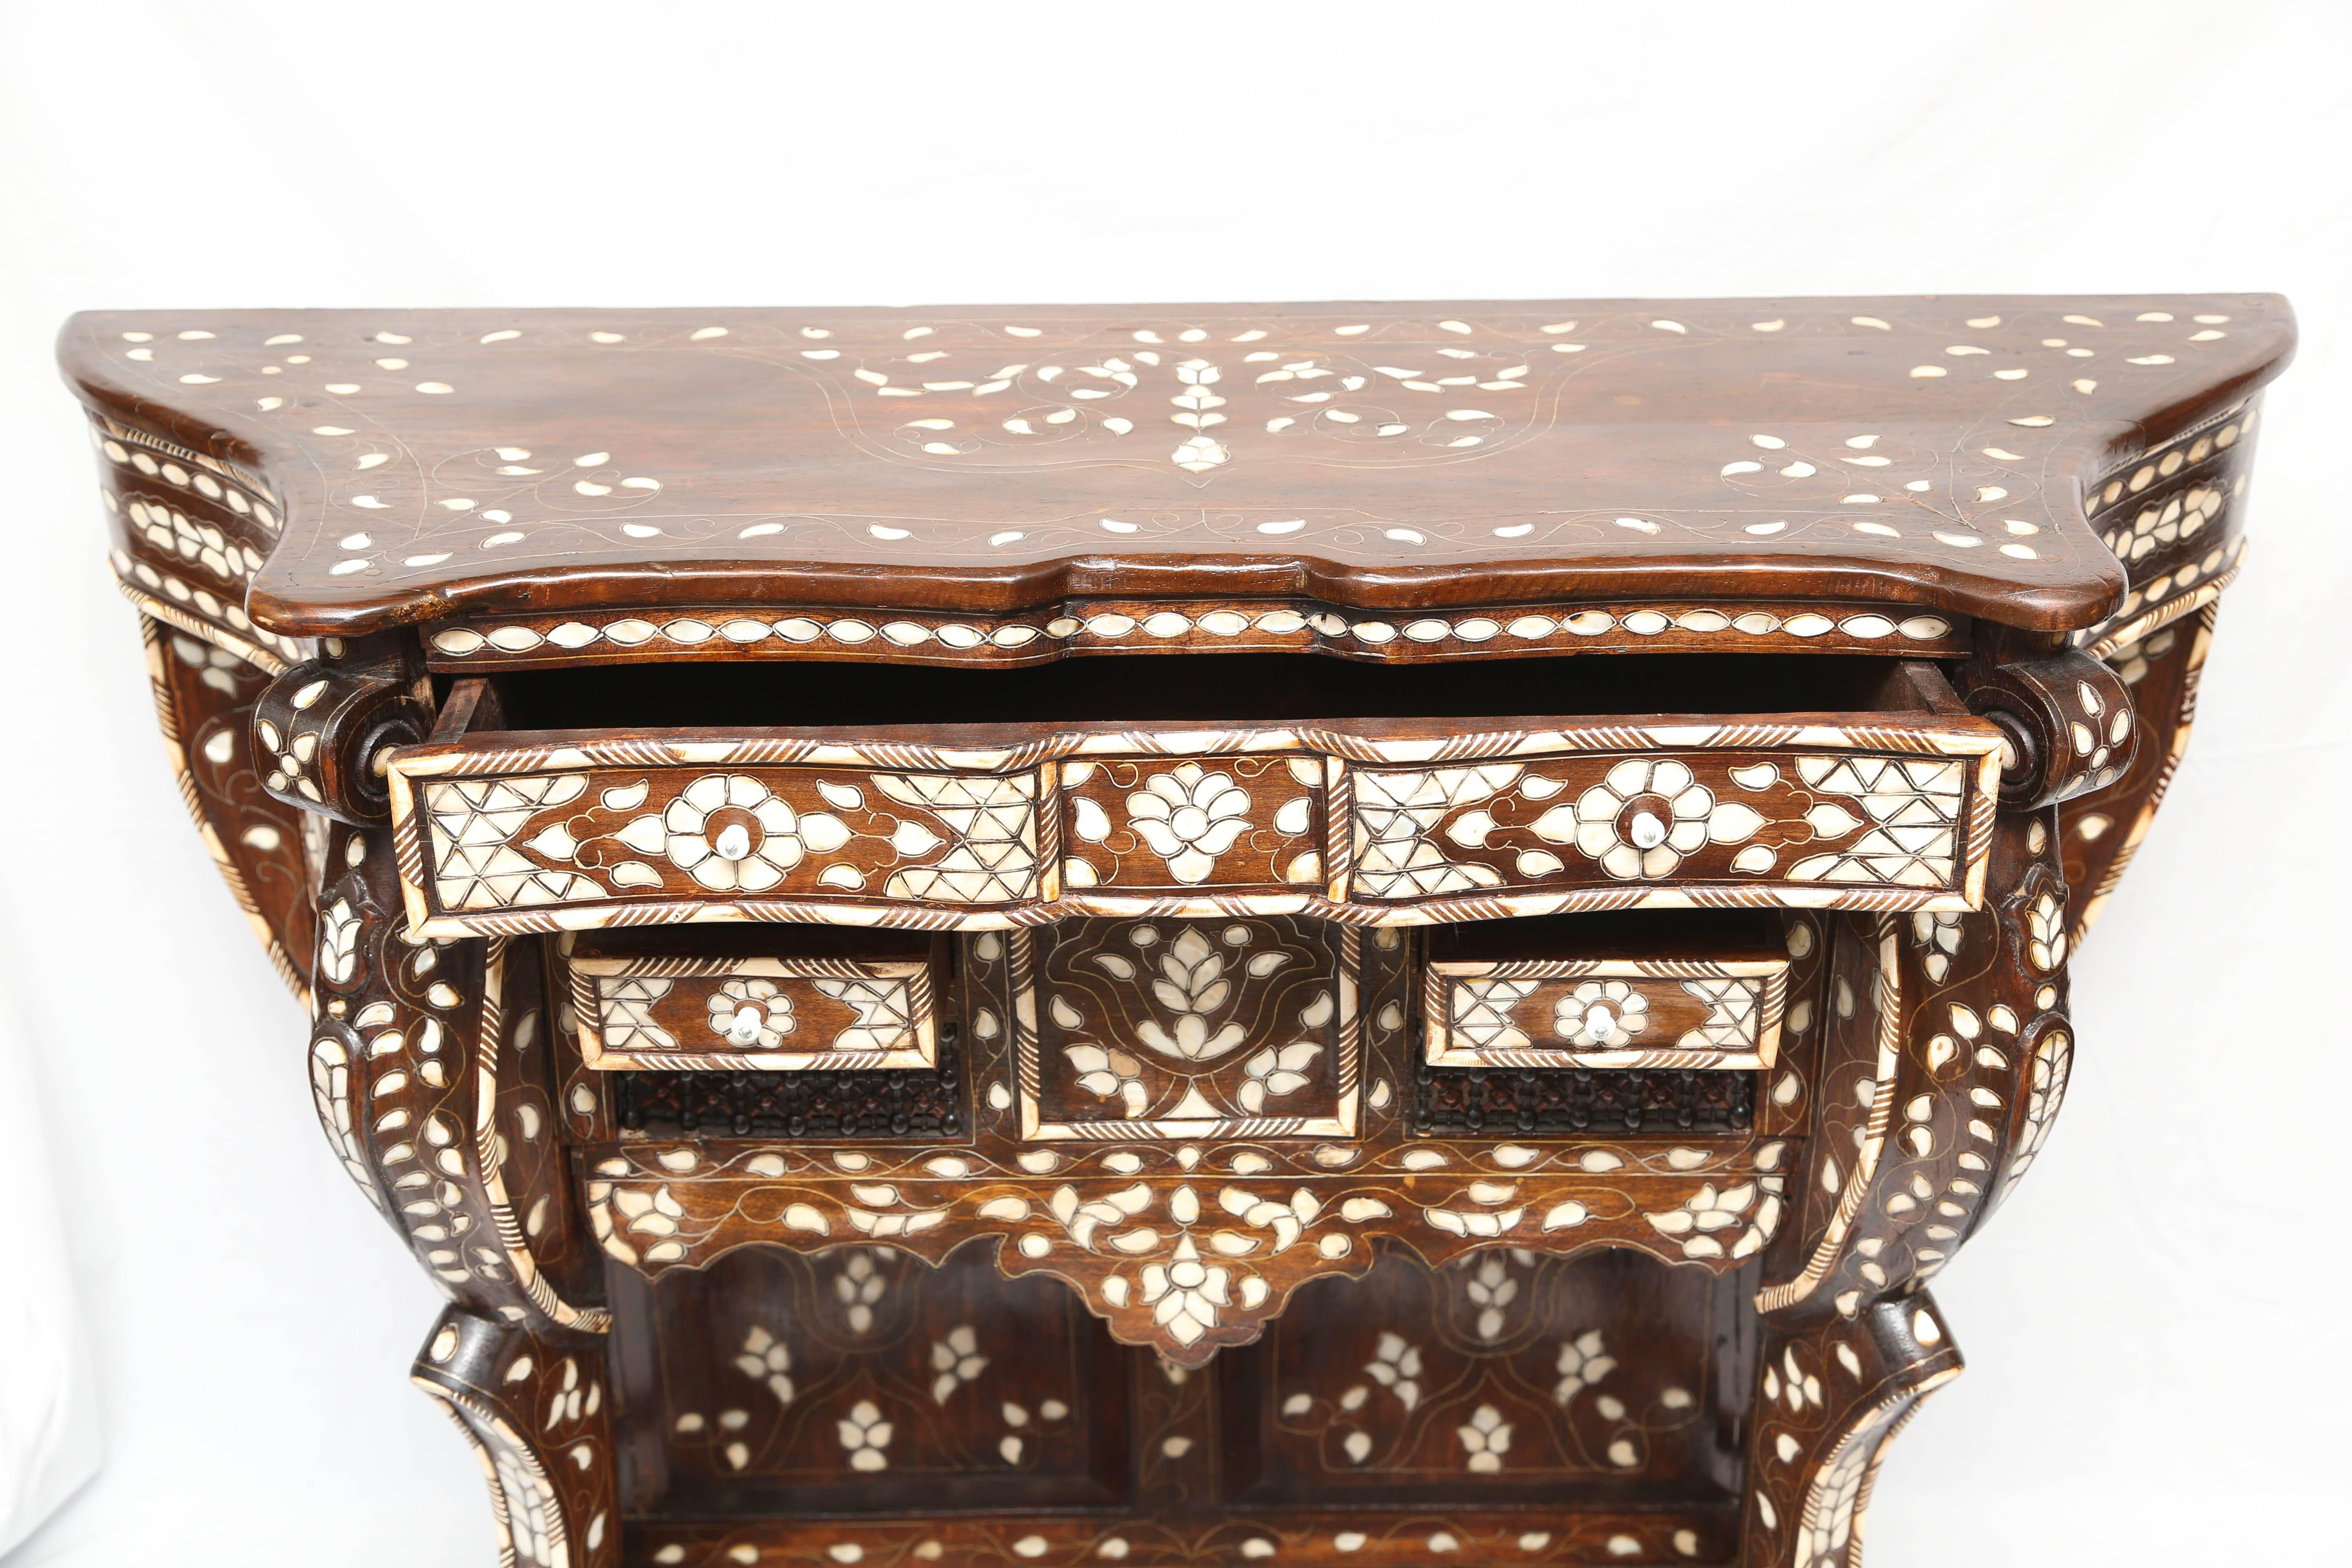 20th Century Syrian Mother-of-Pearl Inlaid Console